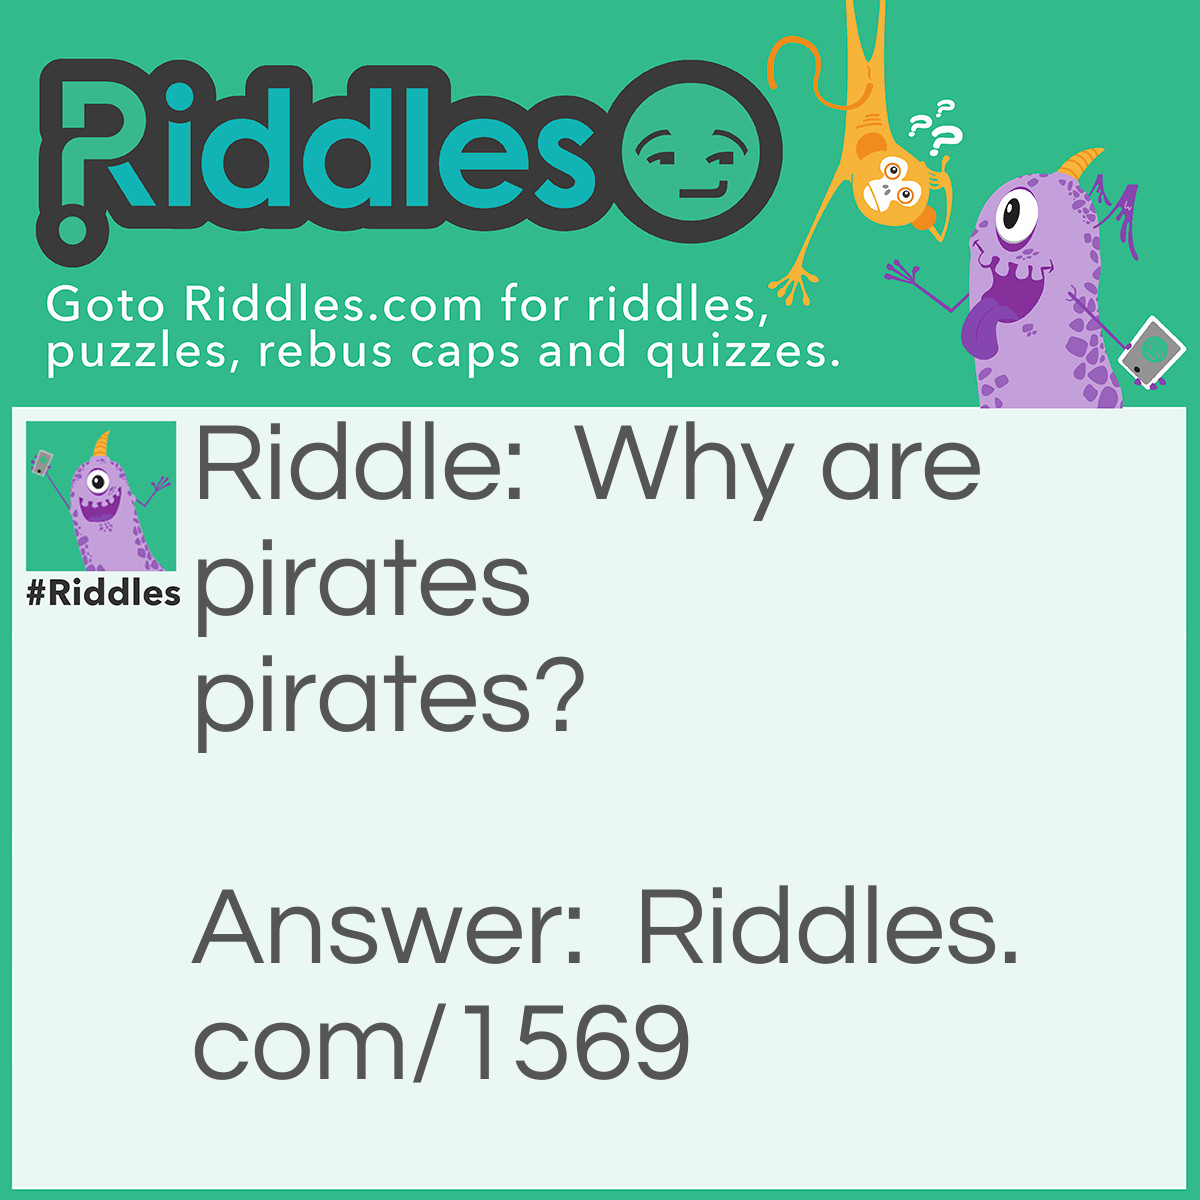 Riddle: Why are pirates <em>pirates?</em> Answer: Because they just Arrrrr!